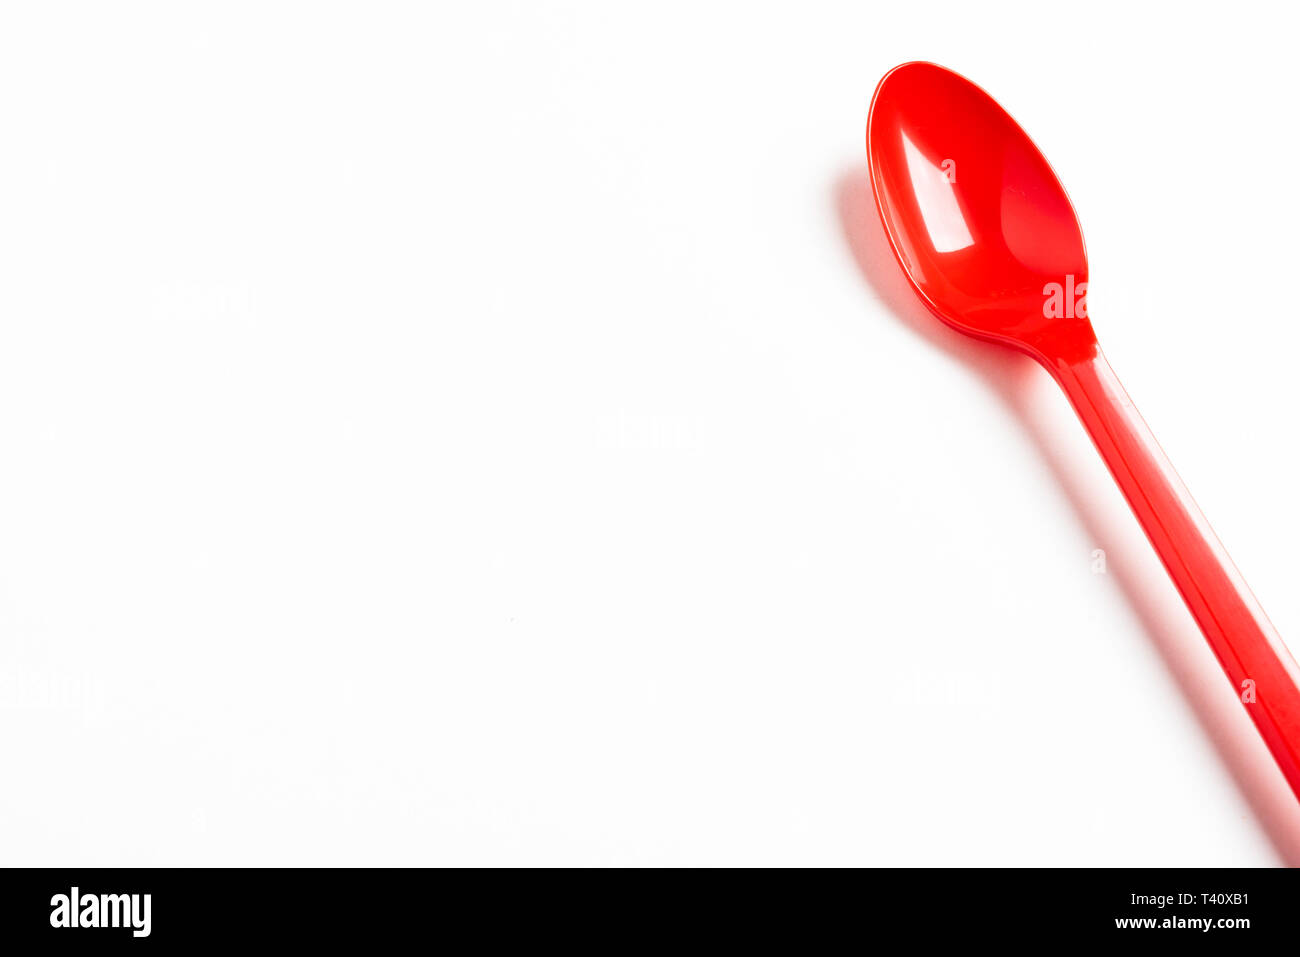 A red shiny long plastic spoon artistically set on a plain white background with negative spaces. Stock Photo